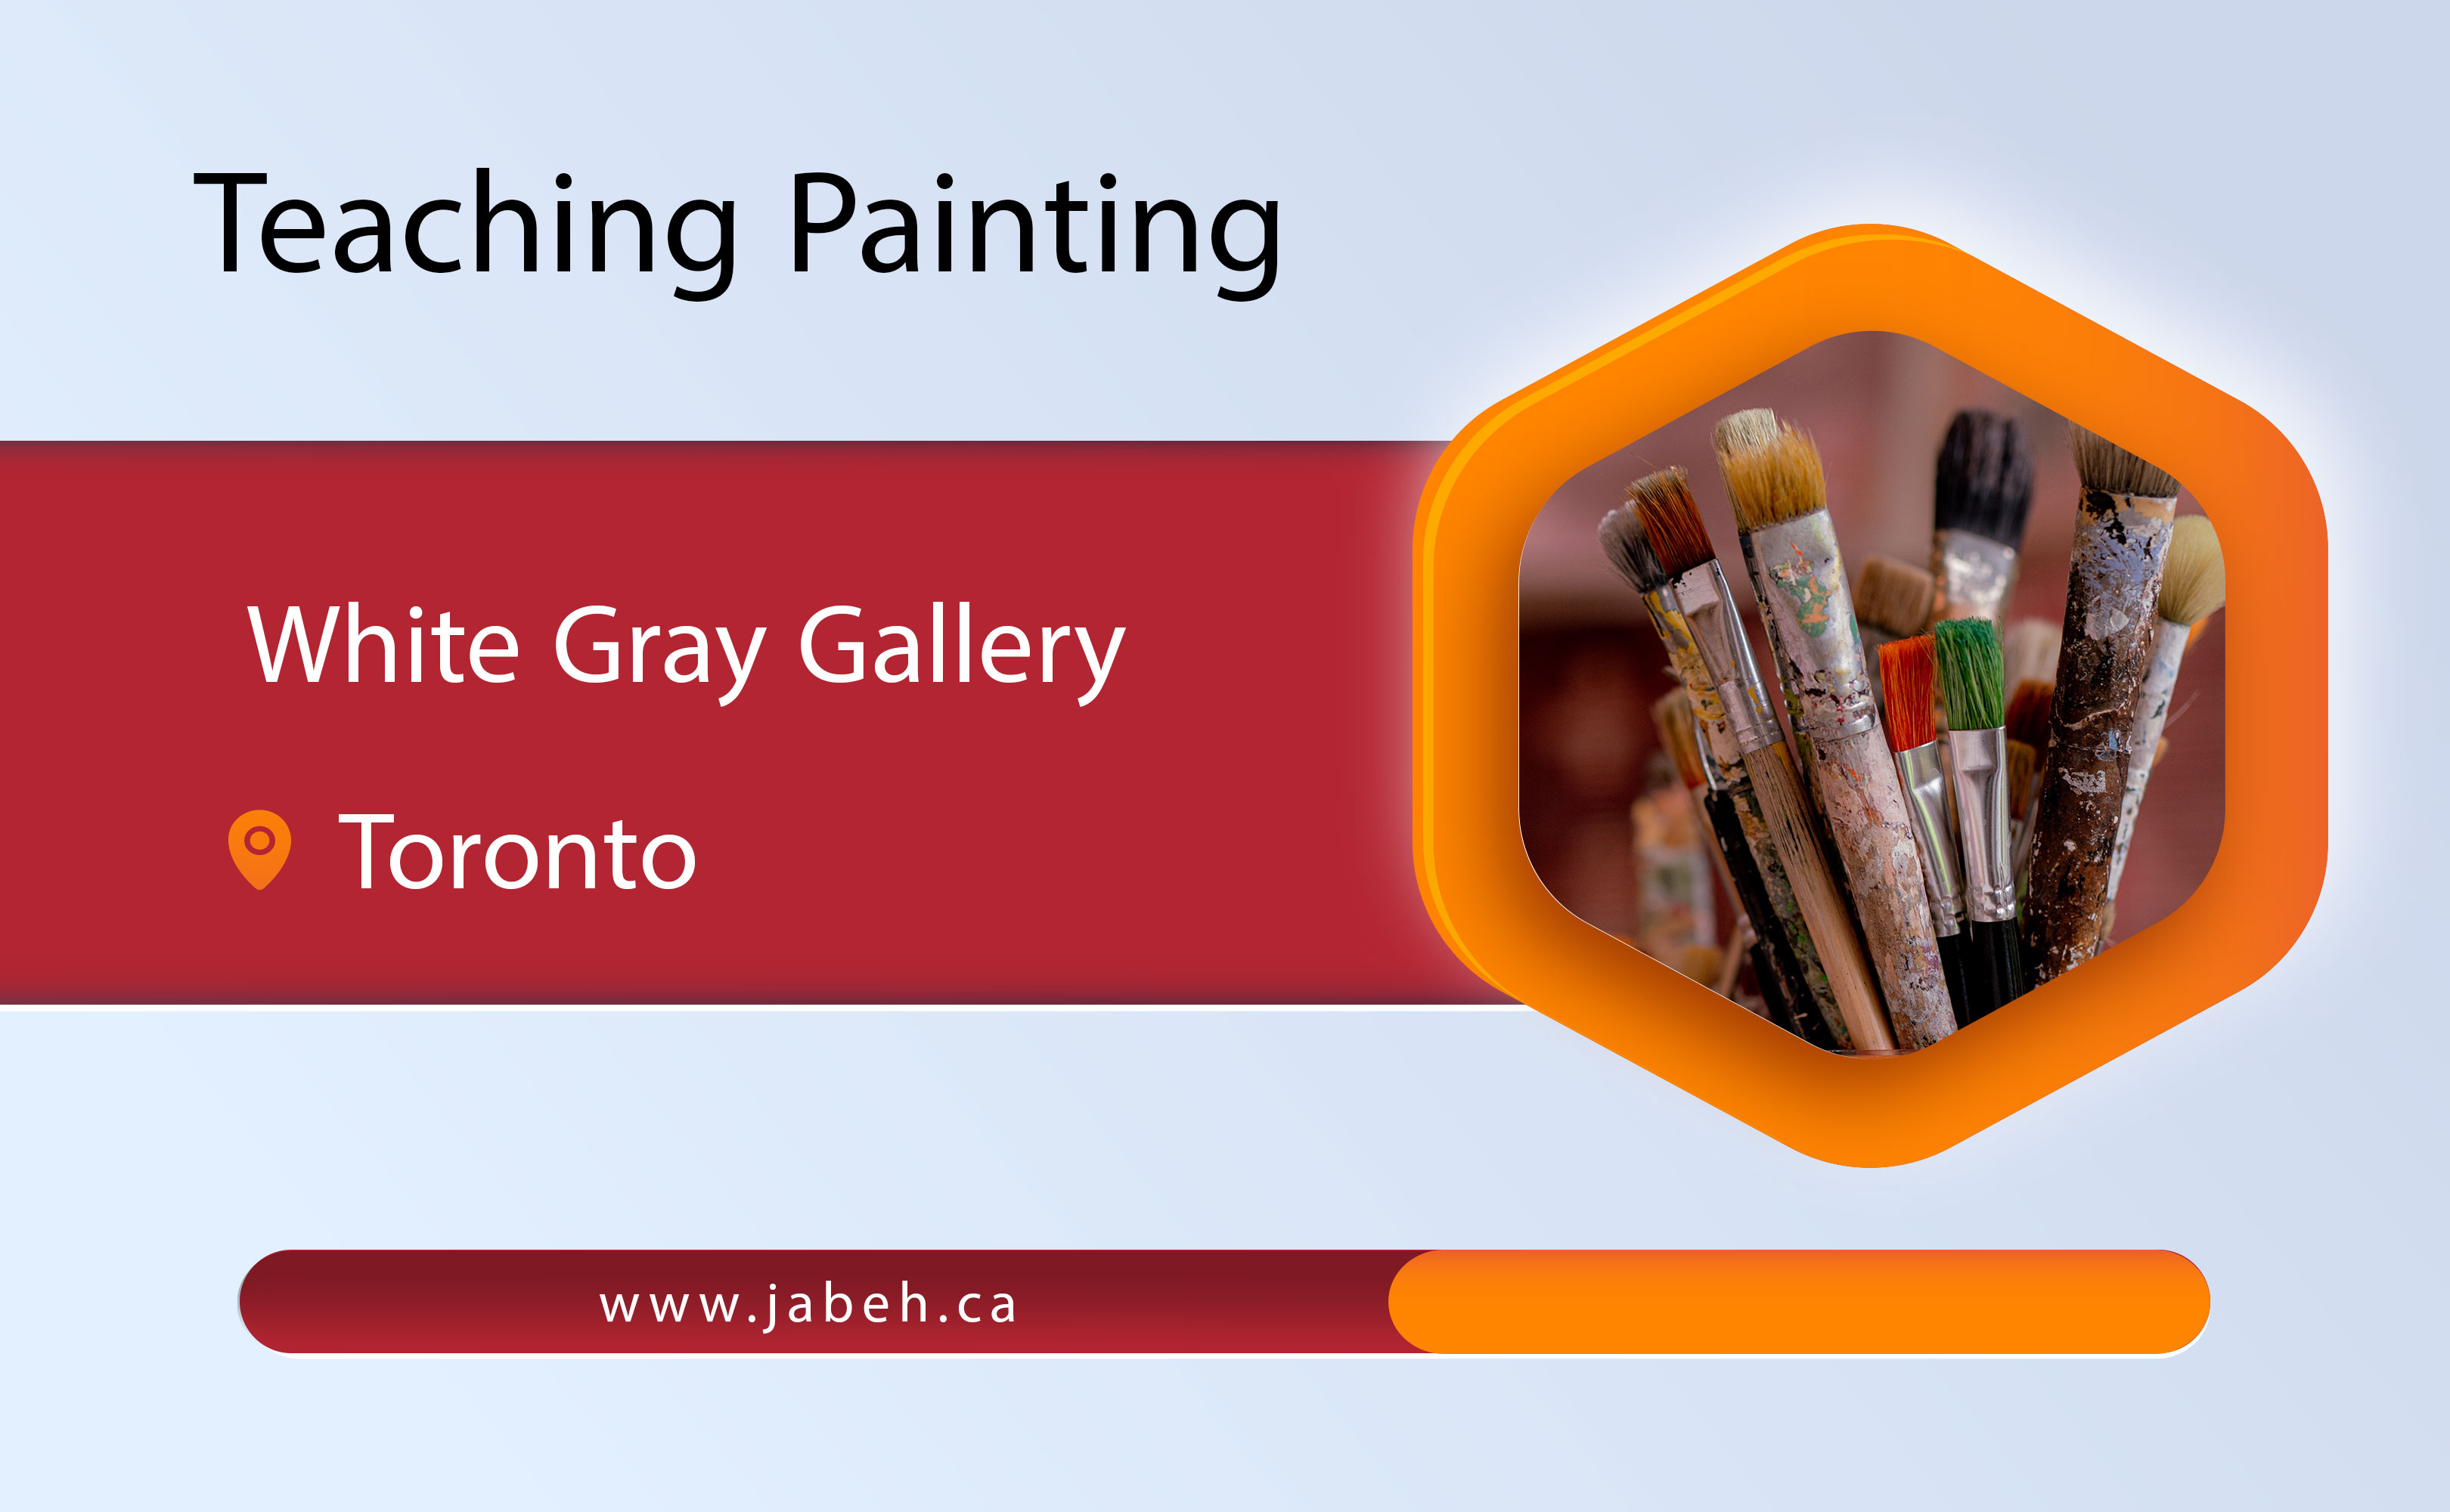 Painting training at the White Gray Gallery in Toronto